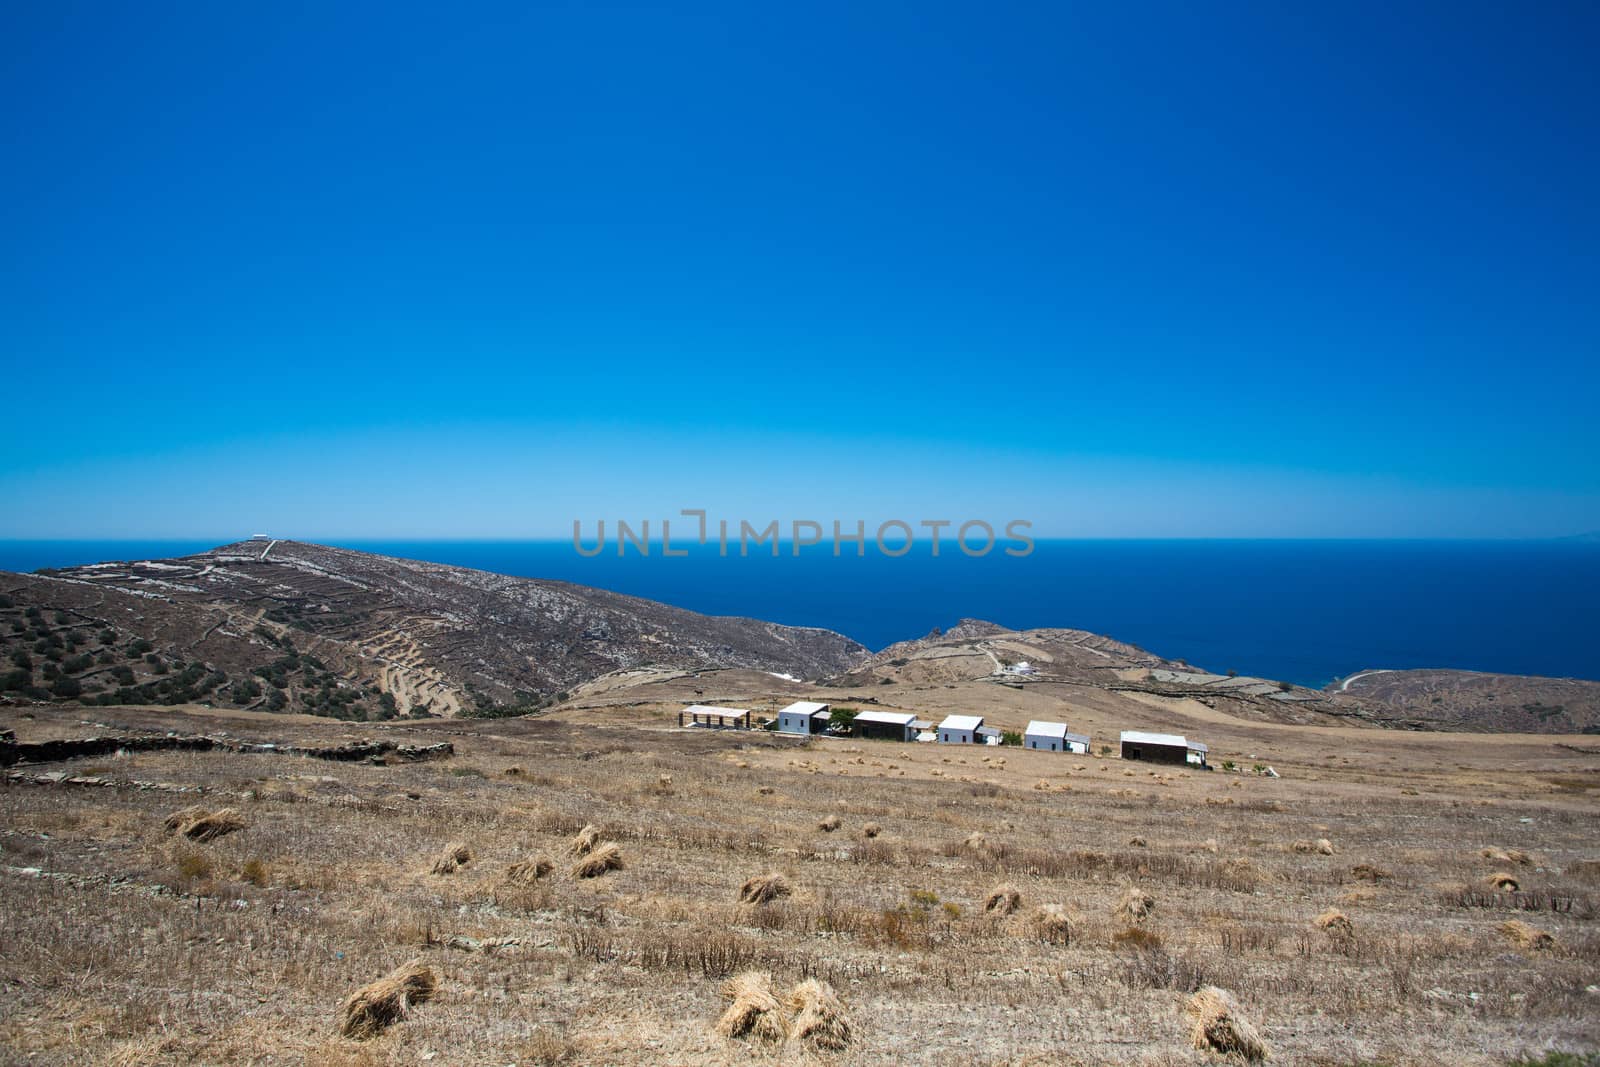 Panoramic view of the seashore of Folangandros, in the distance  are some traditional greek houses and a view of the peaceful aegean sea, Greece, 2013.